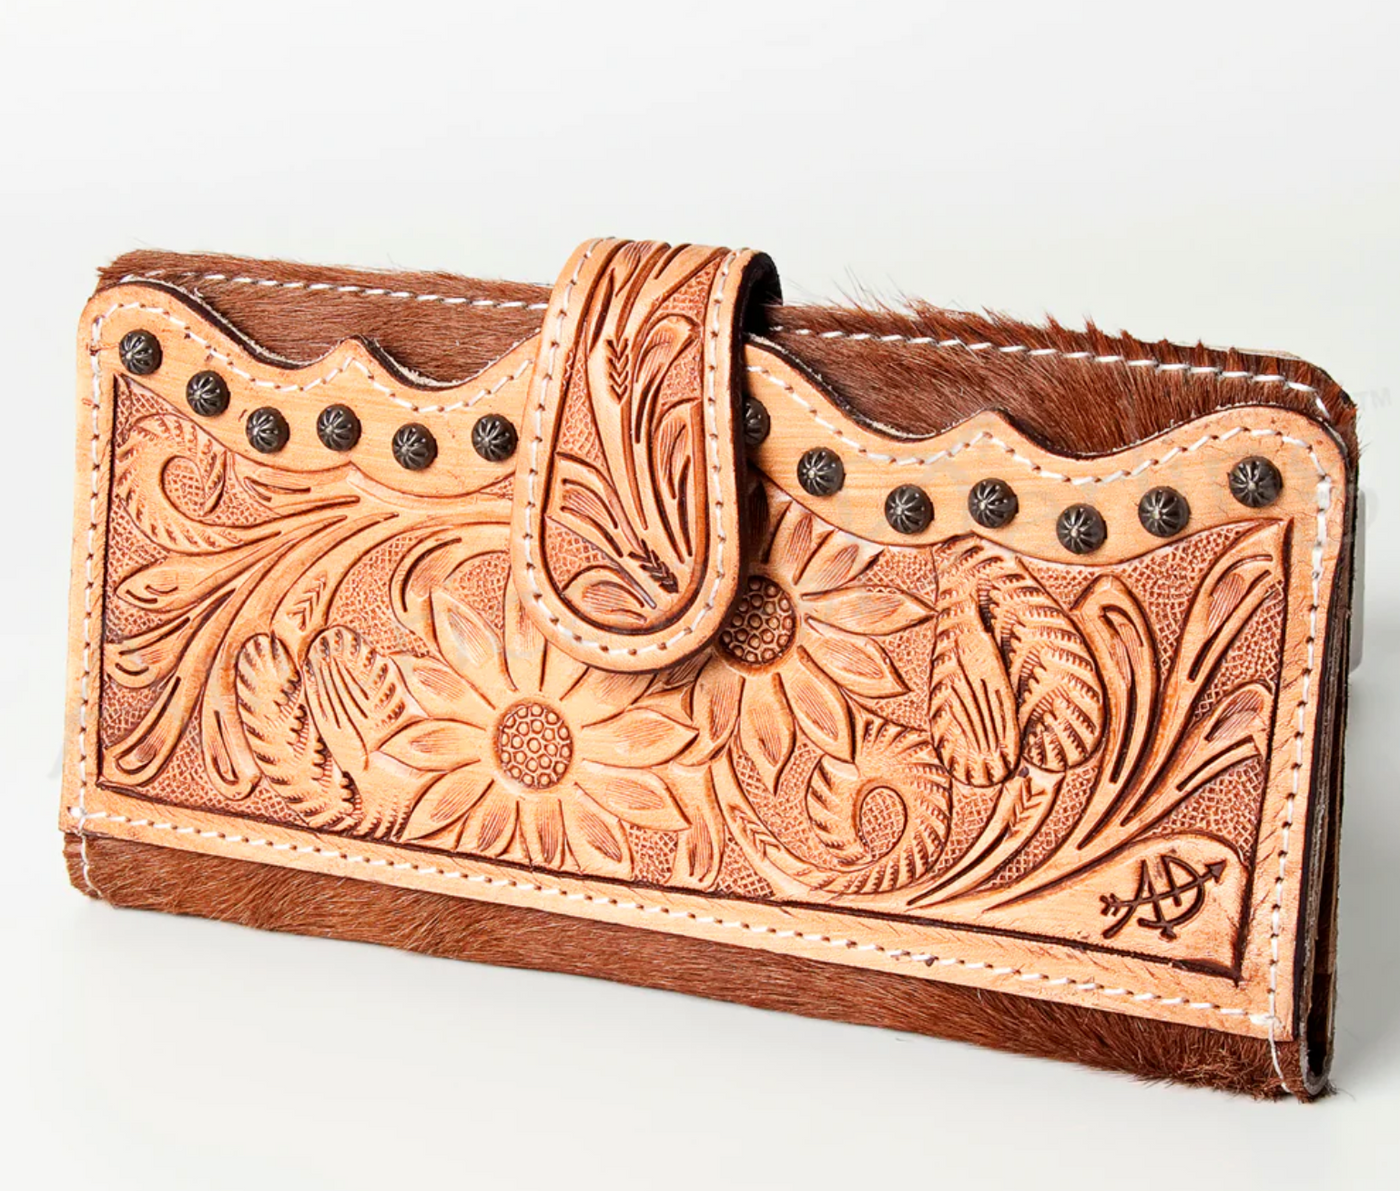 The Paisley Wallet